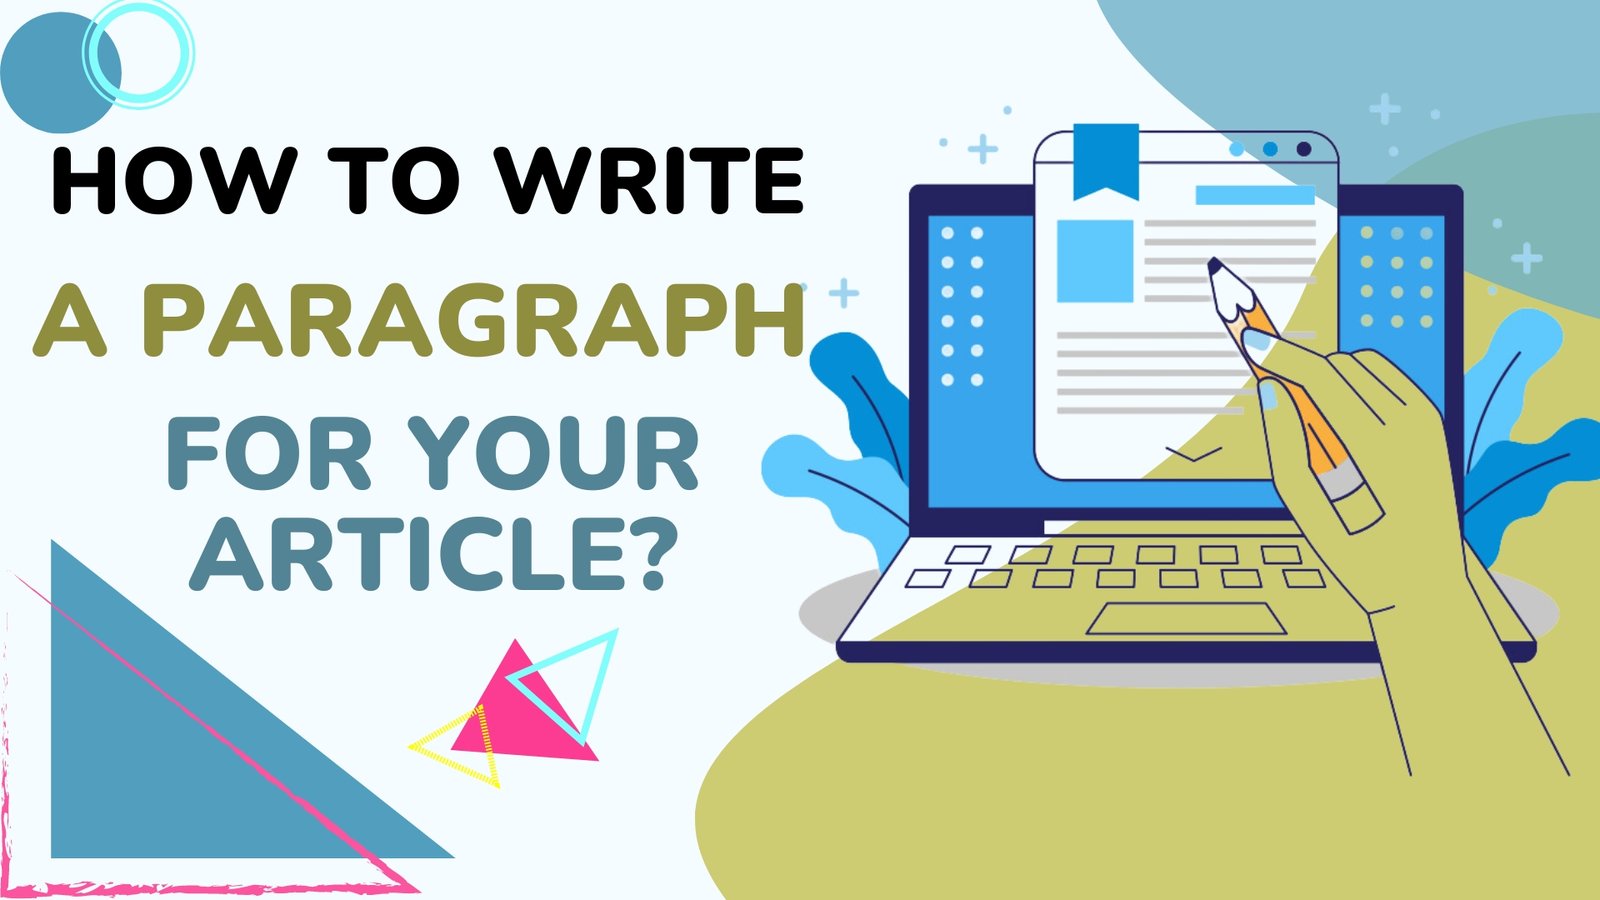 How to Write a Paragraph for Your Article?